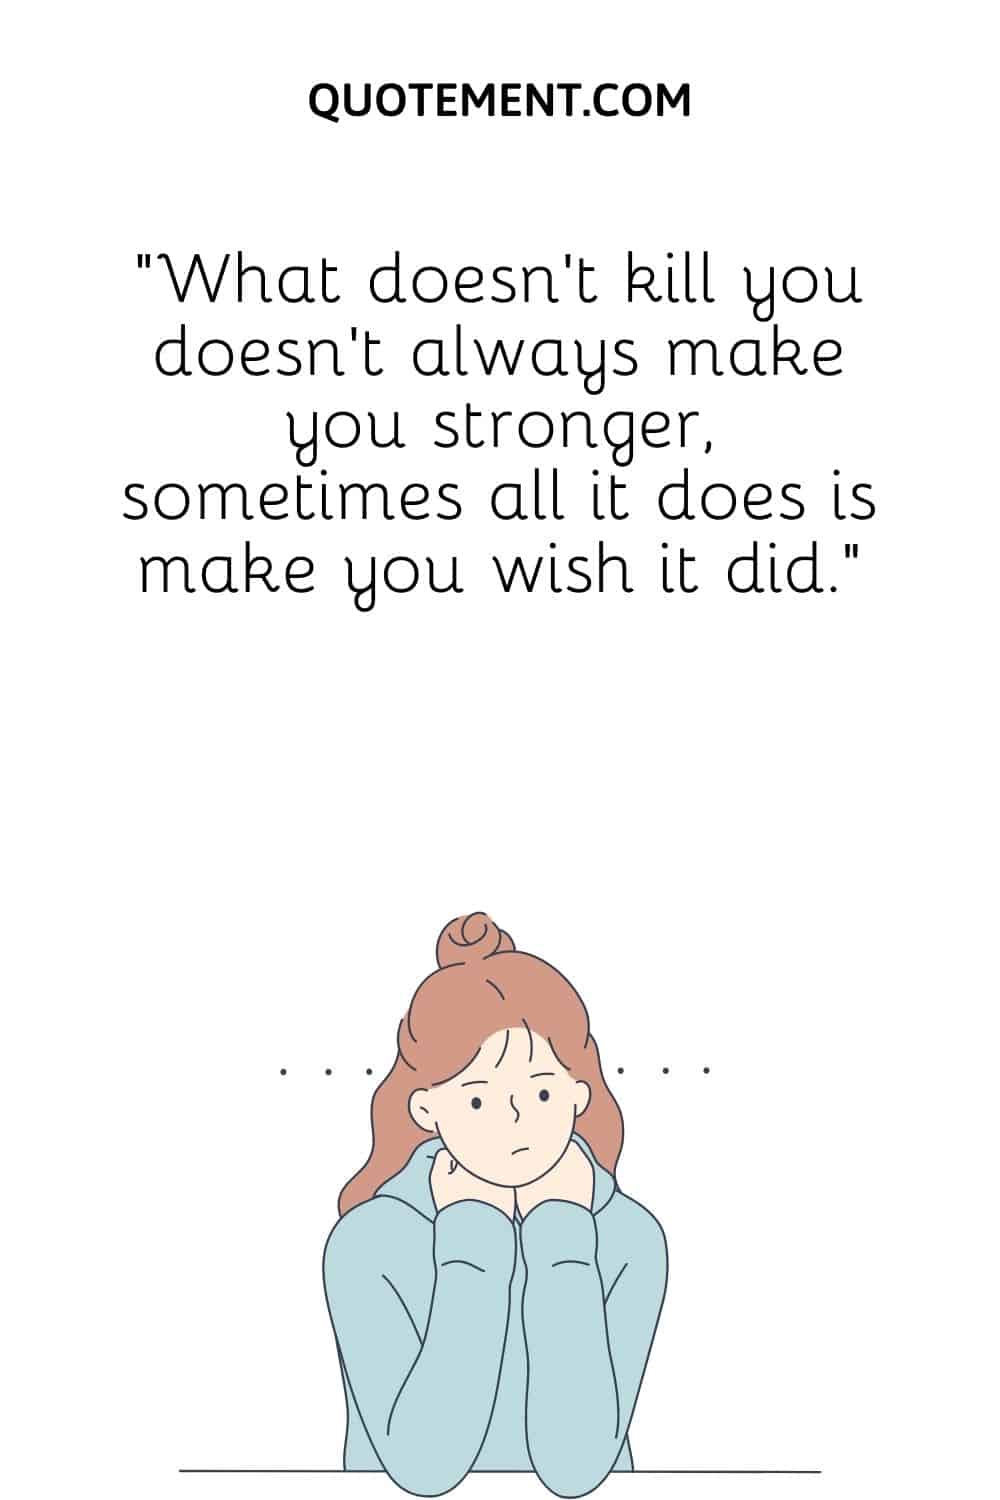 What doesn’t kill you doesn’t always make you stronger